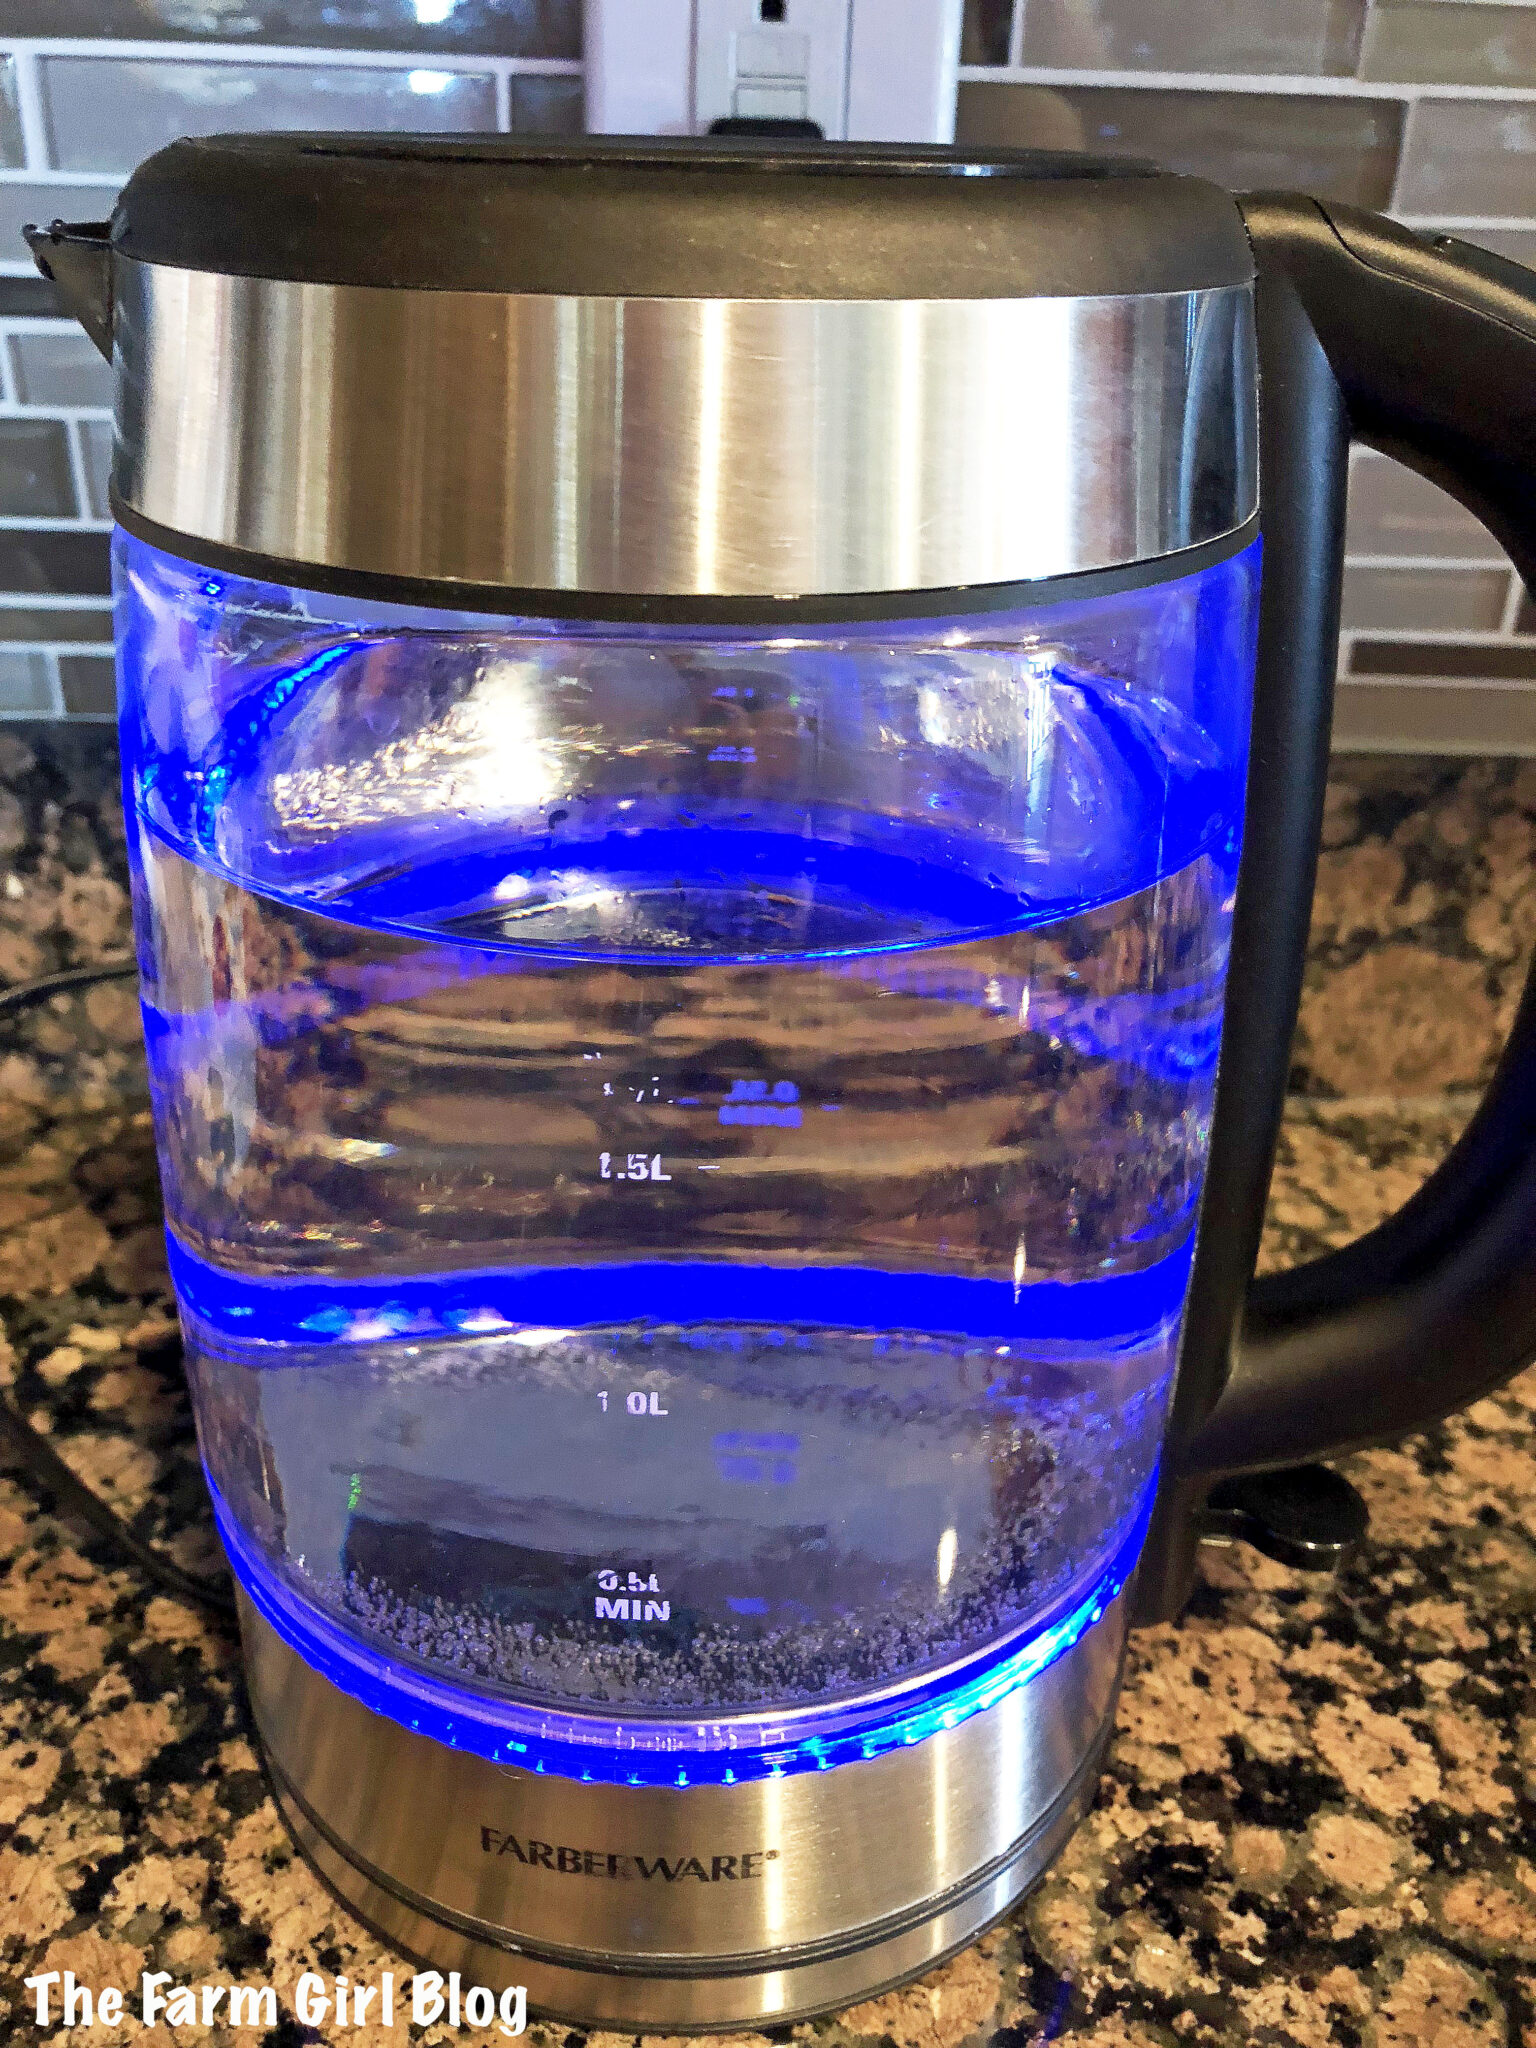 The electric kettle is a very common and handy little kitchen appliance, because of its convenience and quicker boiling than a stove top kettle. With colder temperatures approaching it gets used even more at my house. And that means even more cleaning is necessary.